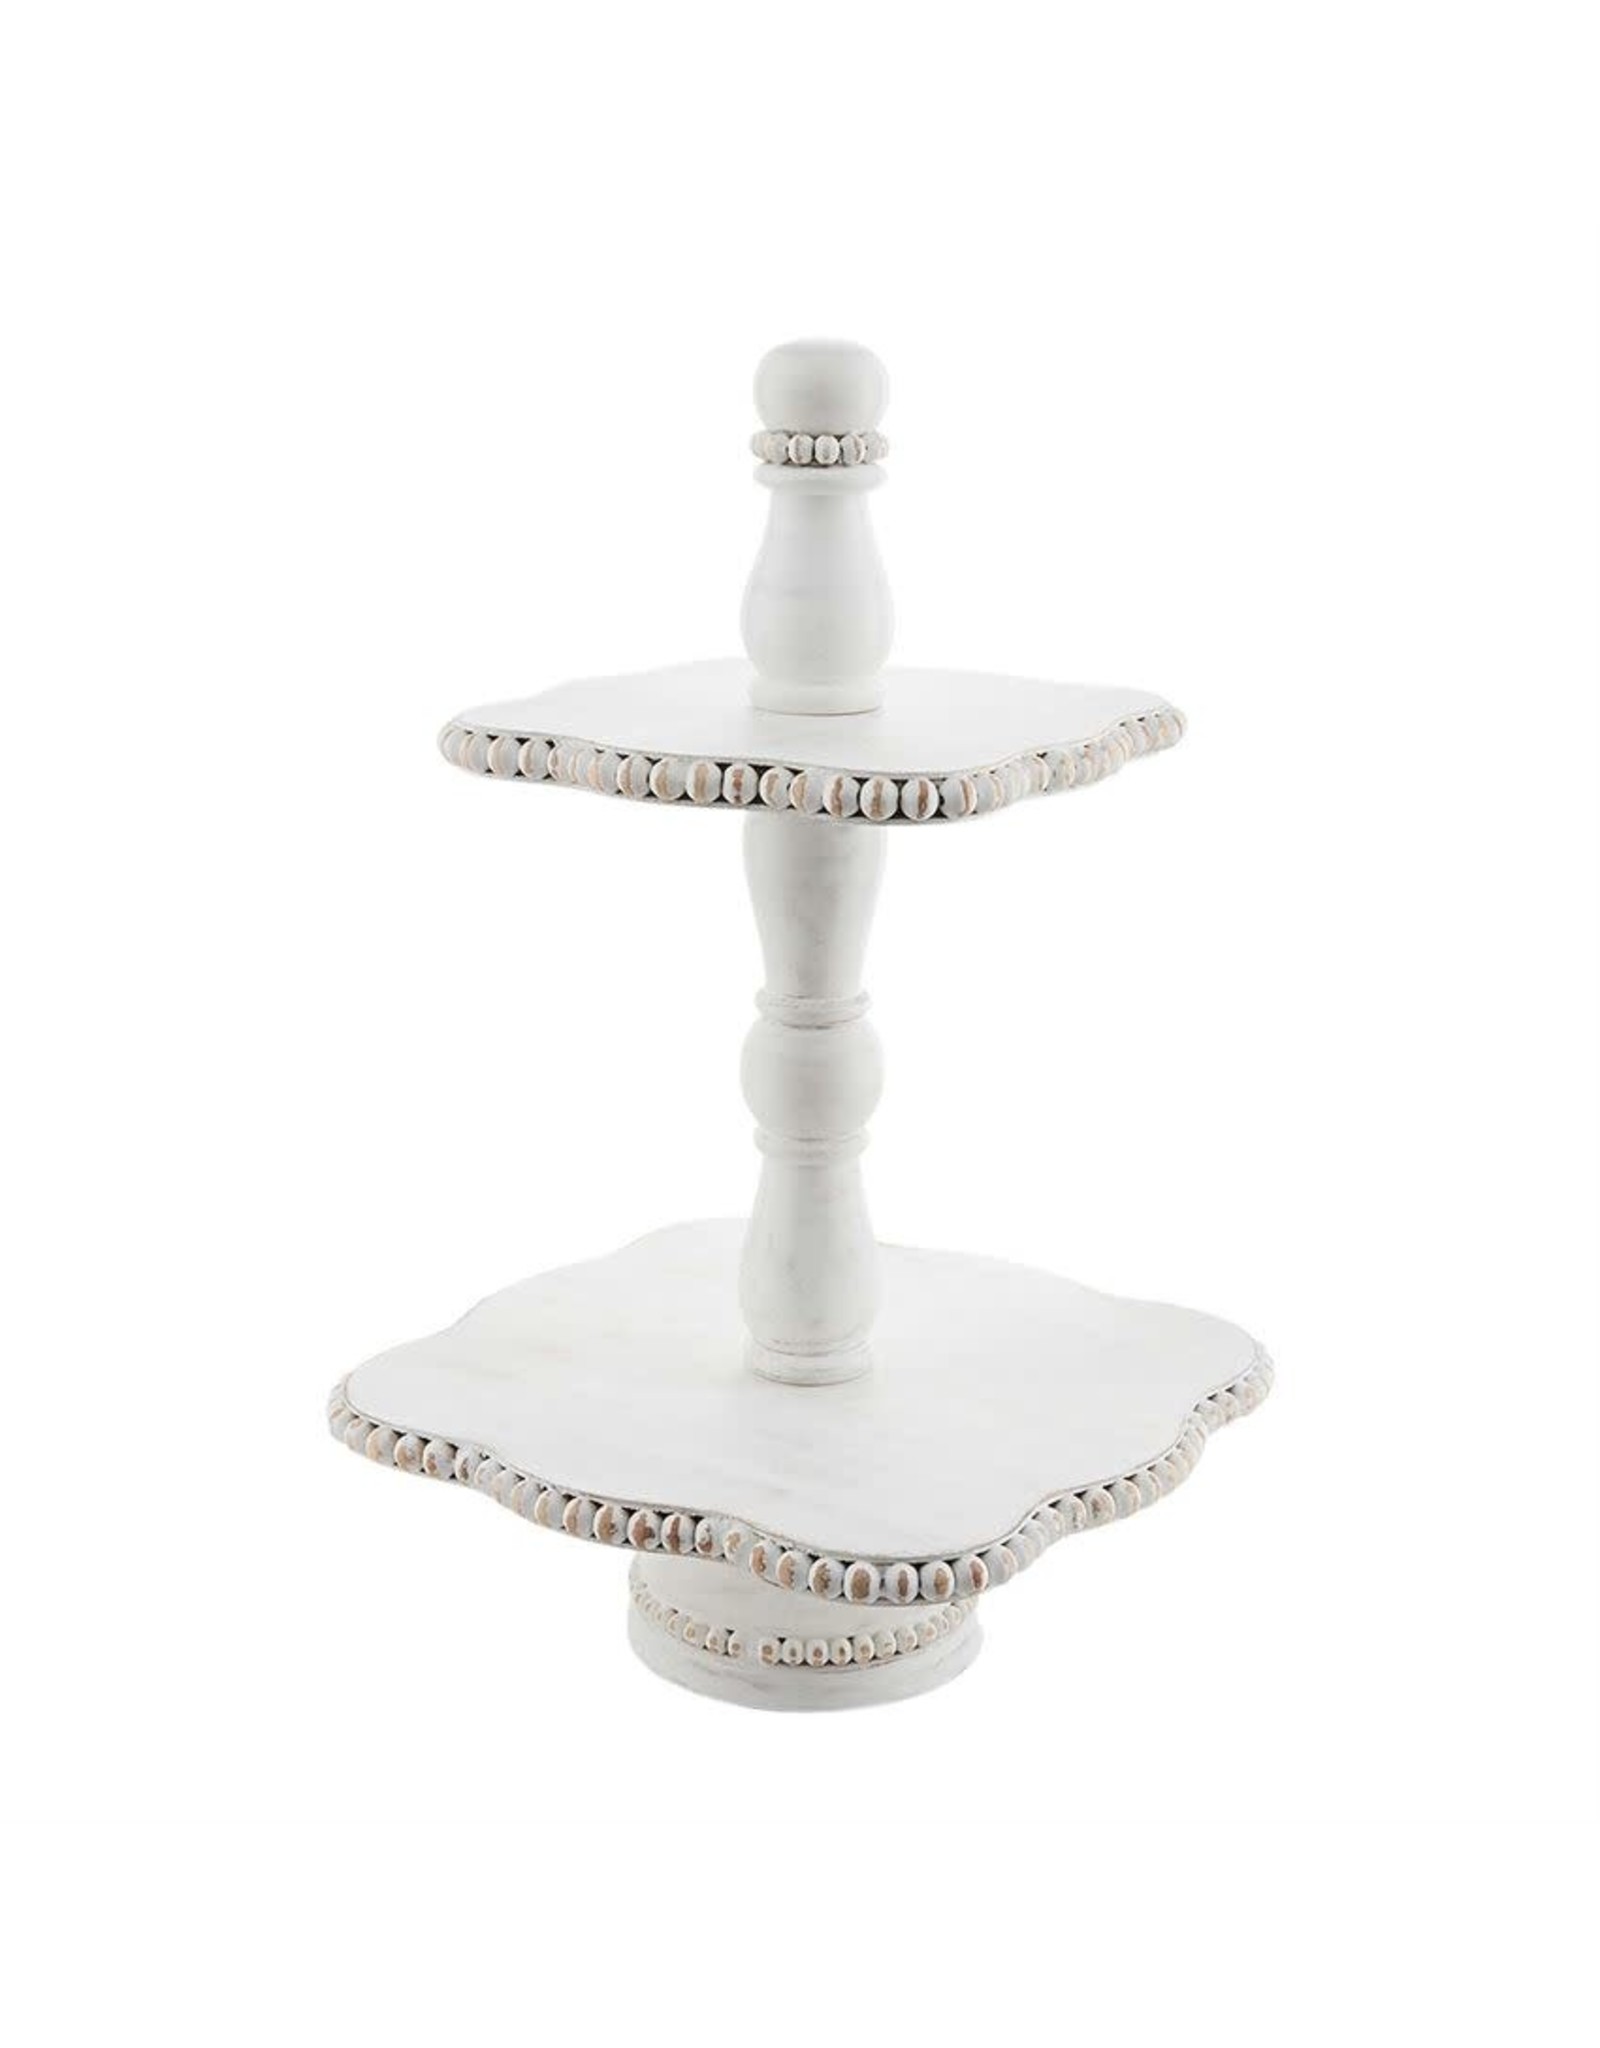 Mud Pie White Washed Beaded Tiered Server